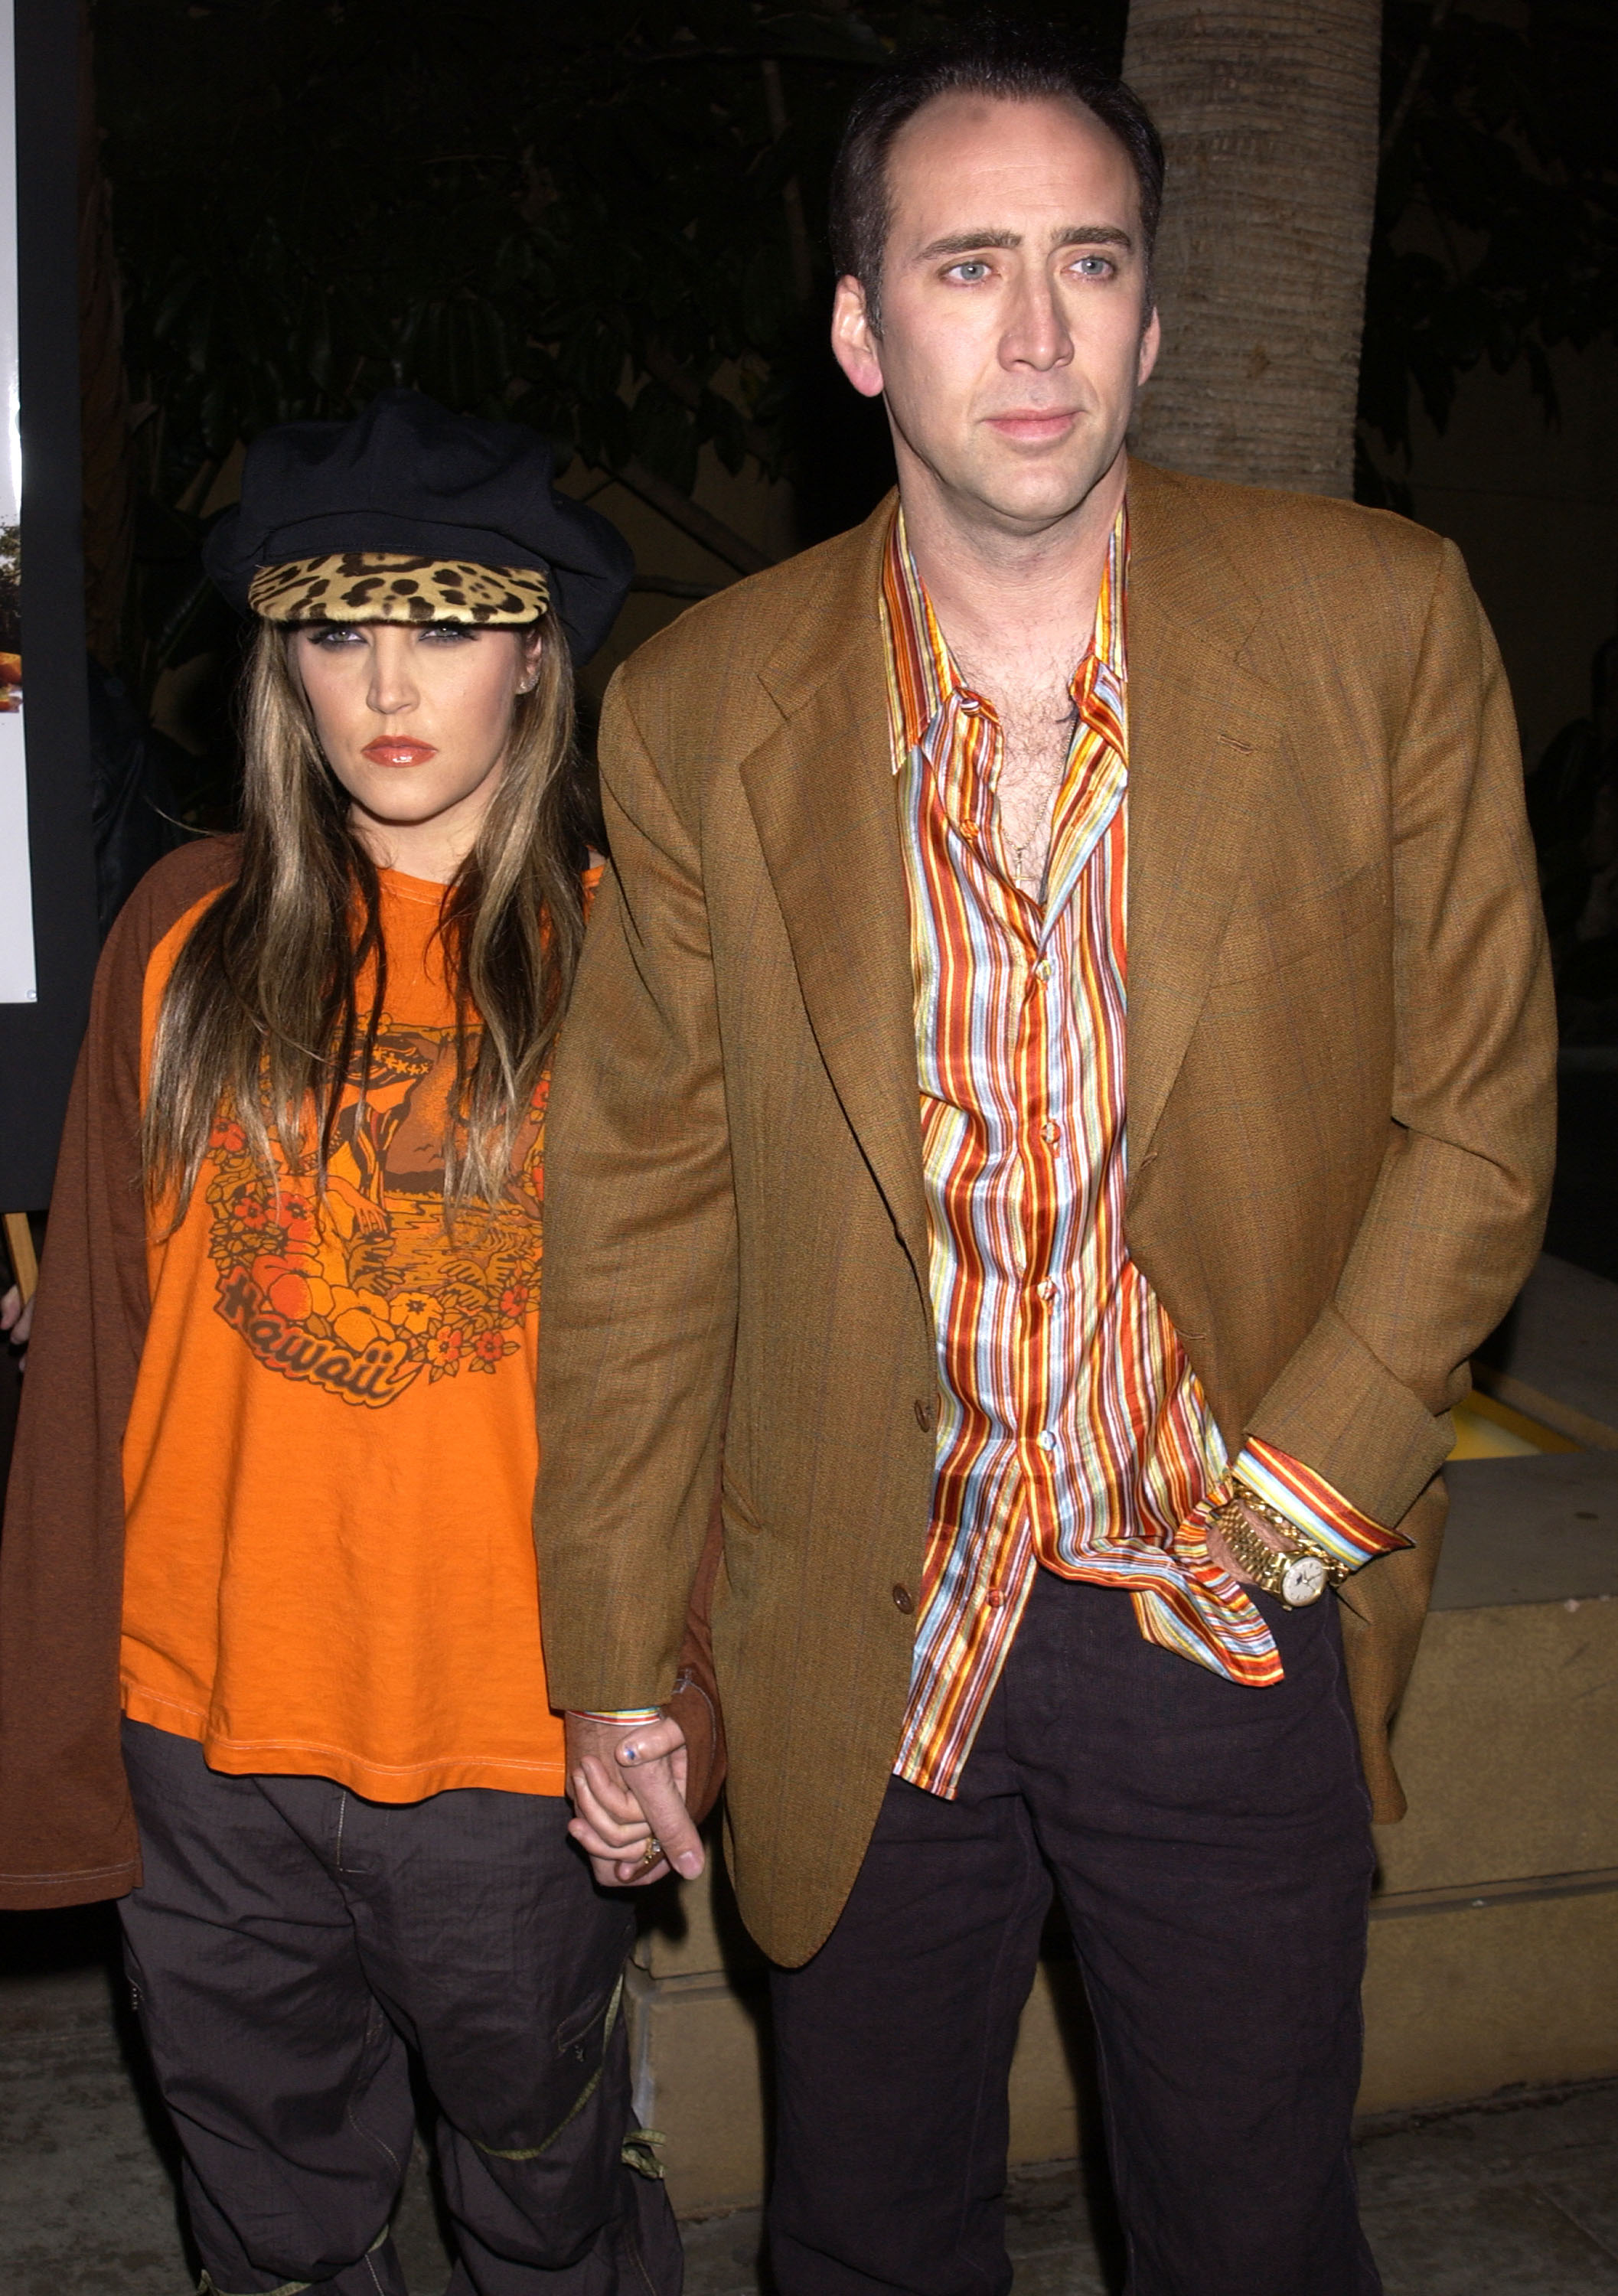 Lisa Marie in a printed shirt and blazer, and Nic in a cap and layered shirts, holding hands